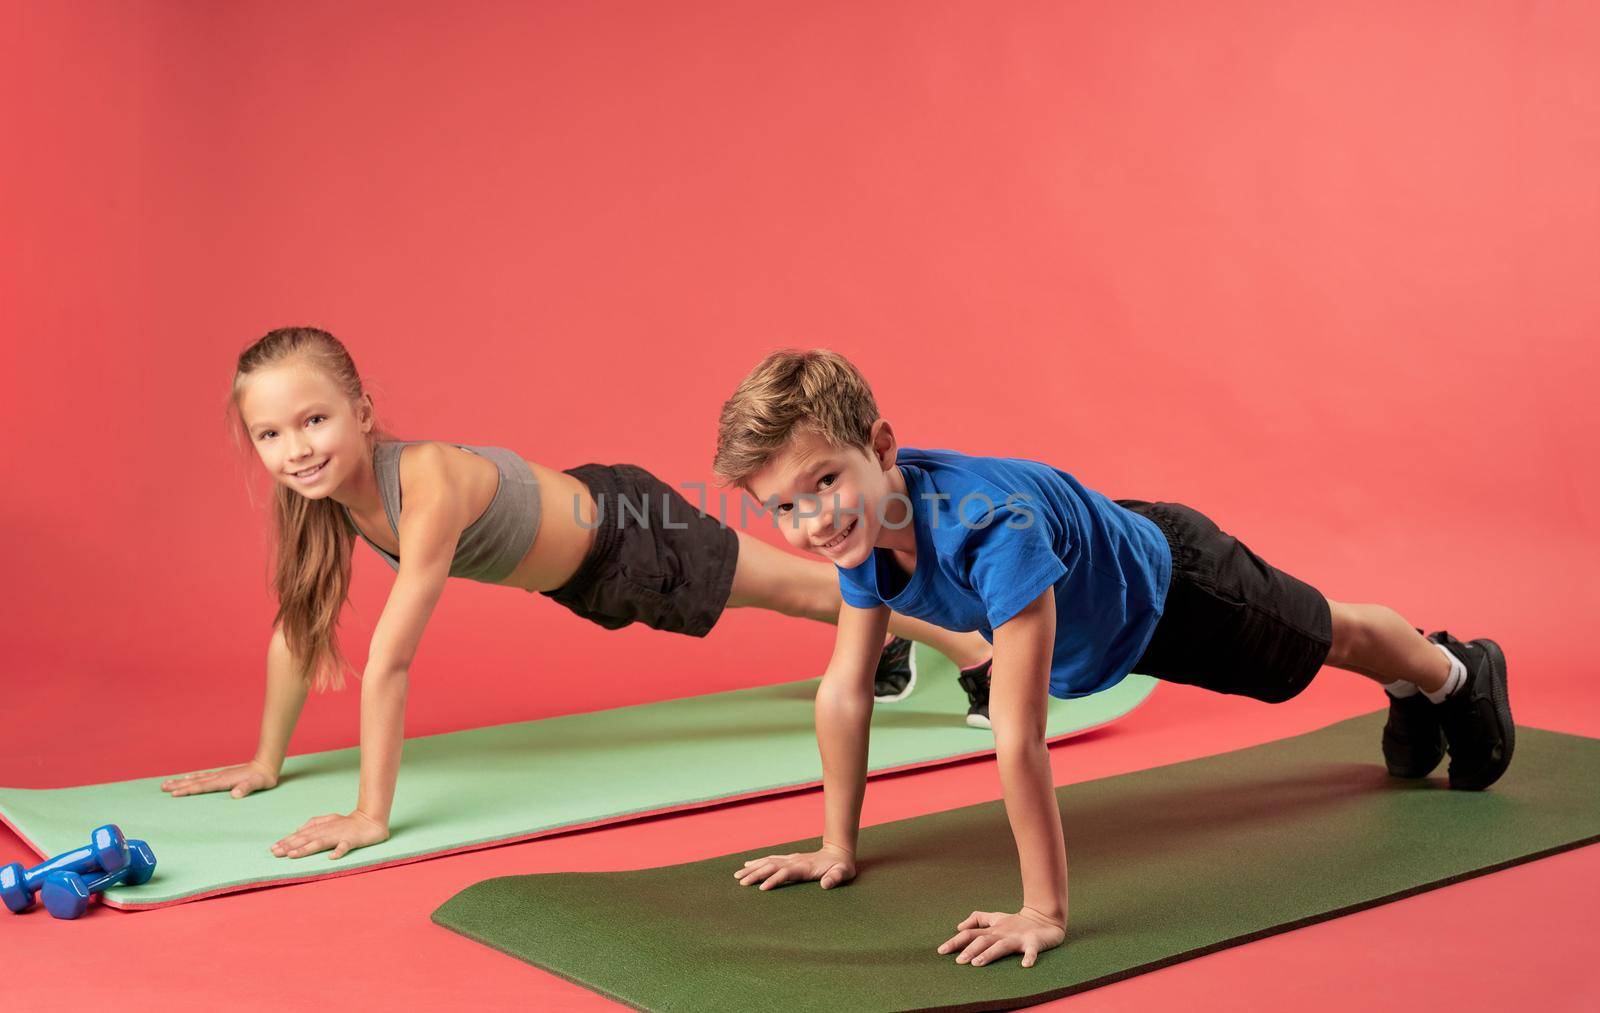 Adorable girl and boy holding push-up position and smiling while doing strength exercise on yoga mats